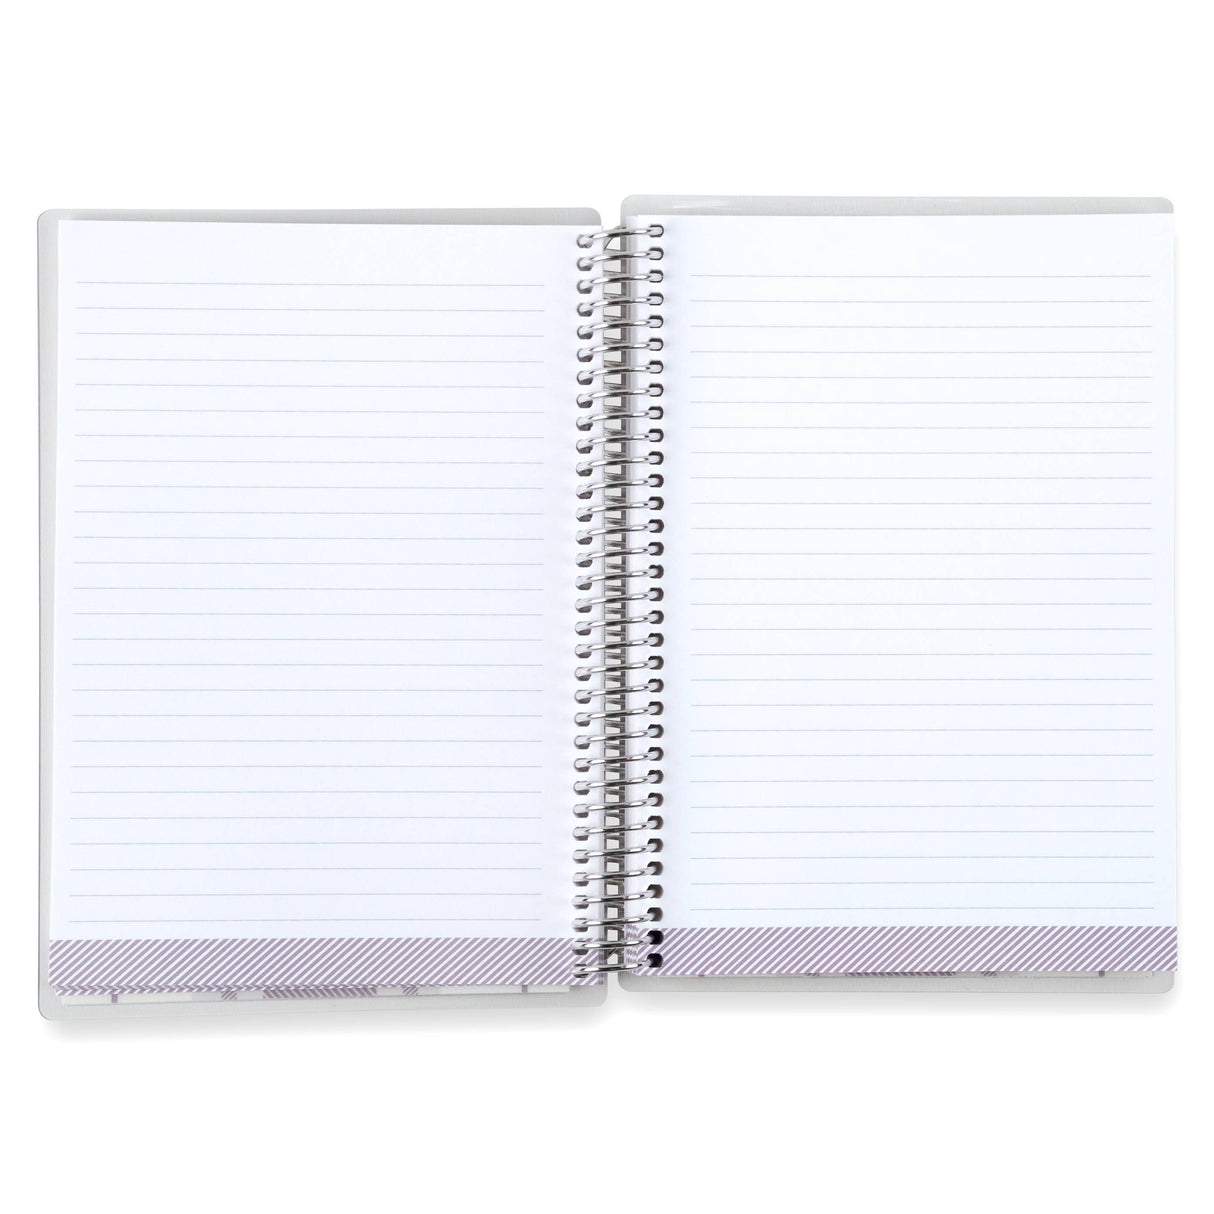 Erin Condren A5 Cozy Plaid Coiled Notebook - Lined